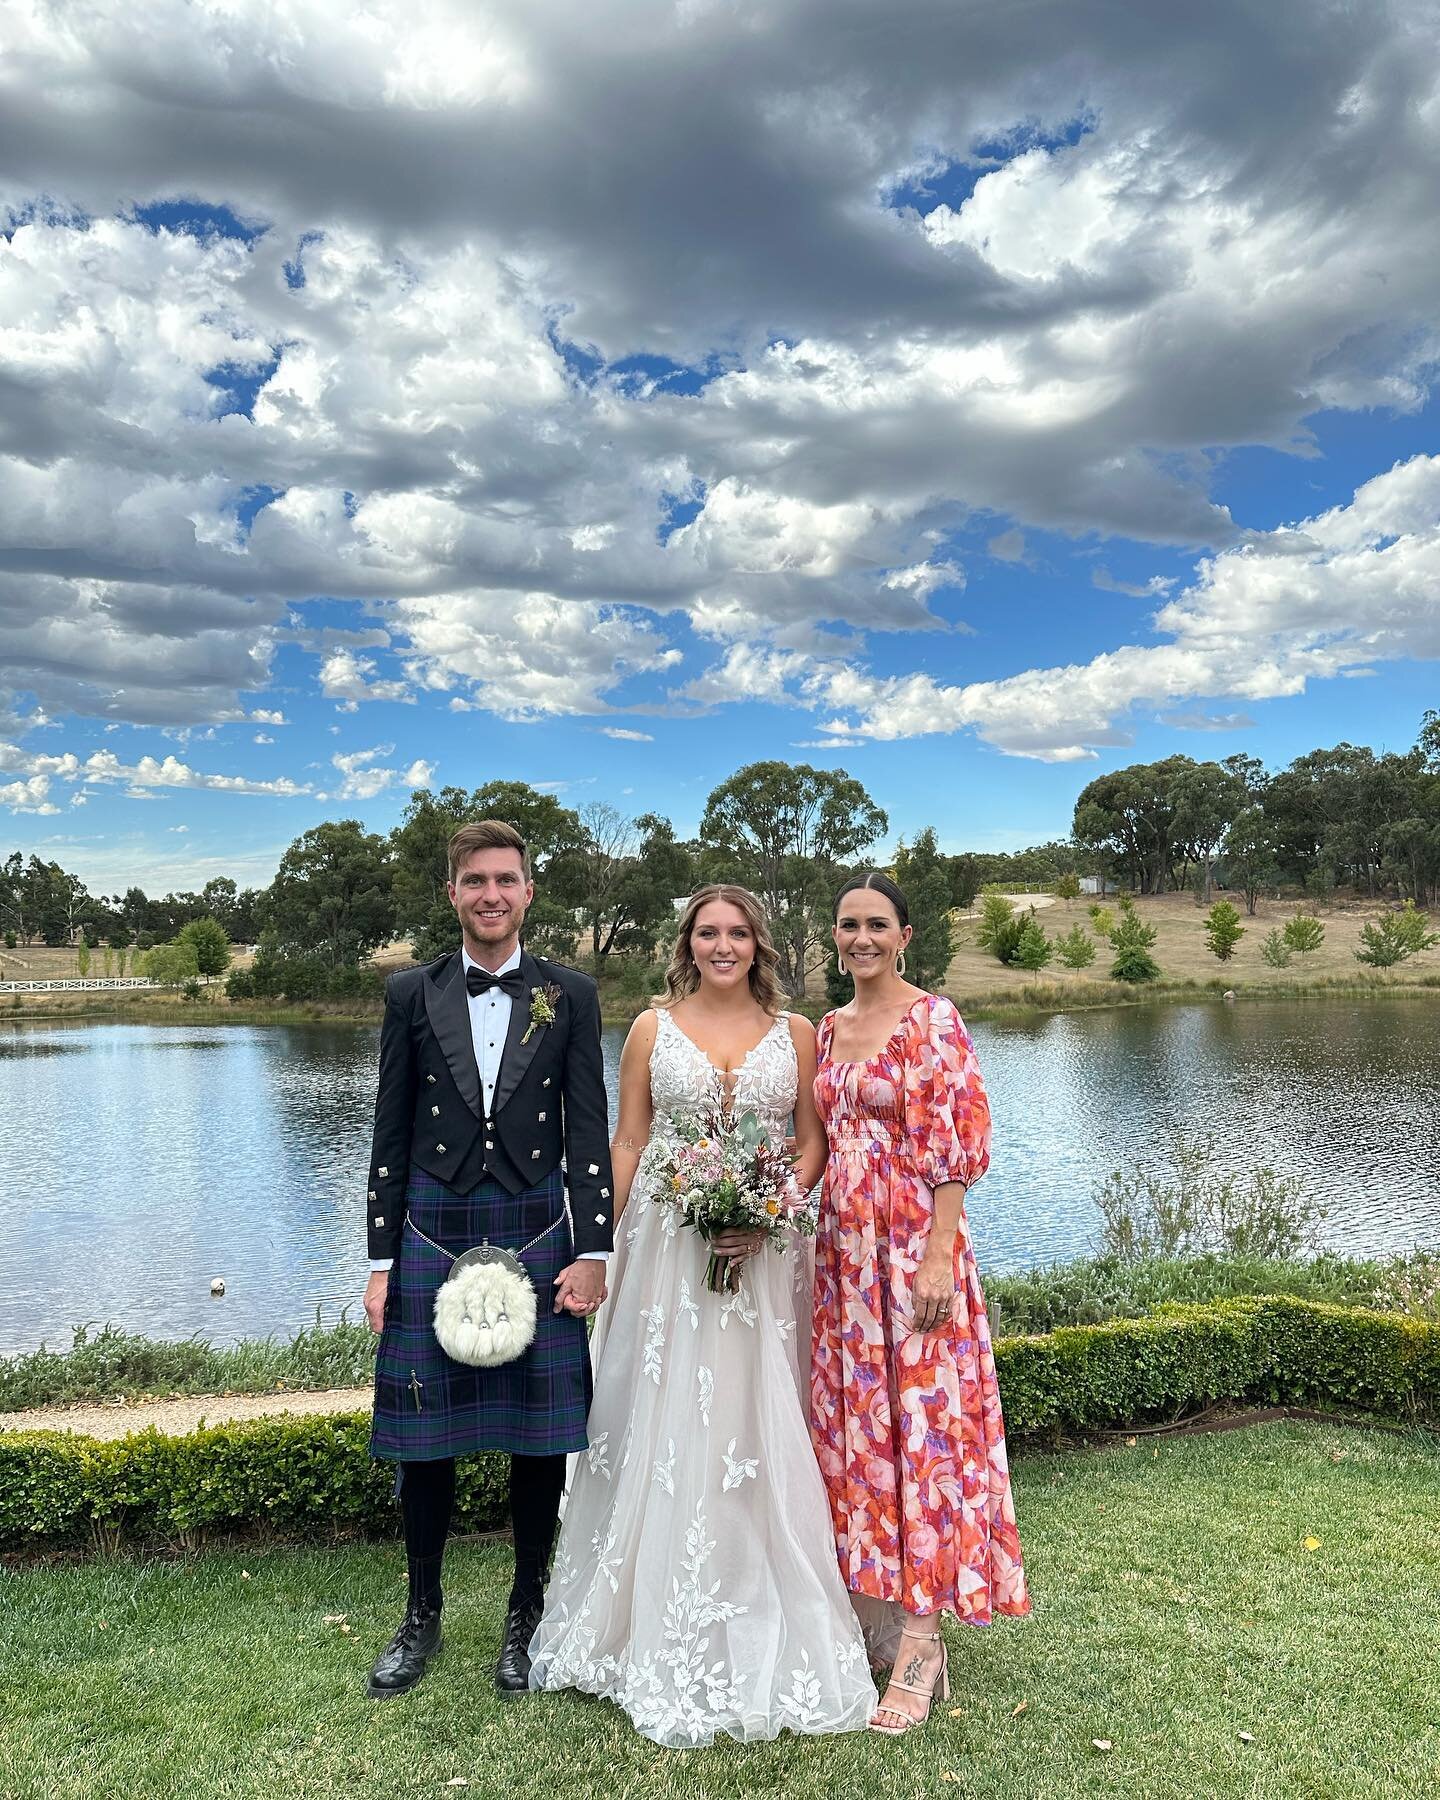 🖤 𝐌𝐫 &amp; 𝐌𝐫𝐬 𝐇𝐚𝐢𝐥 🖤

What a gorgeous day to be part of!

These Scottish expats have a very special love story &amp; it was an
honour to share it.

Walking out as husband and wife to bag pipes playing, with your loved ones following after